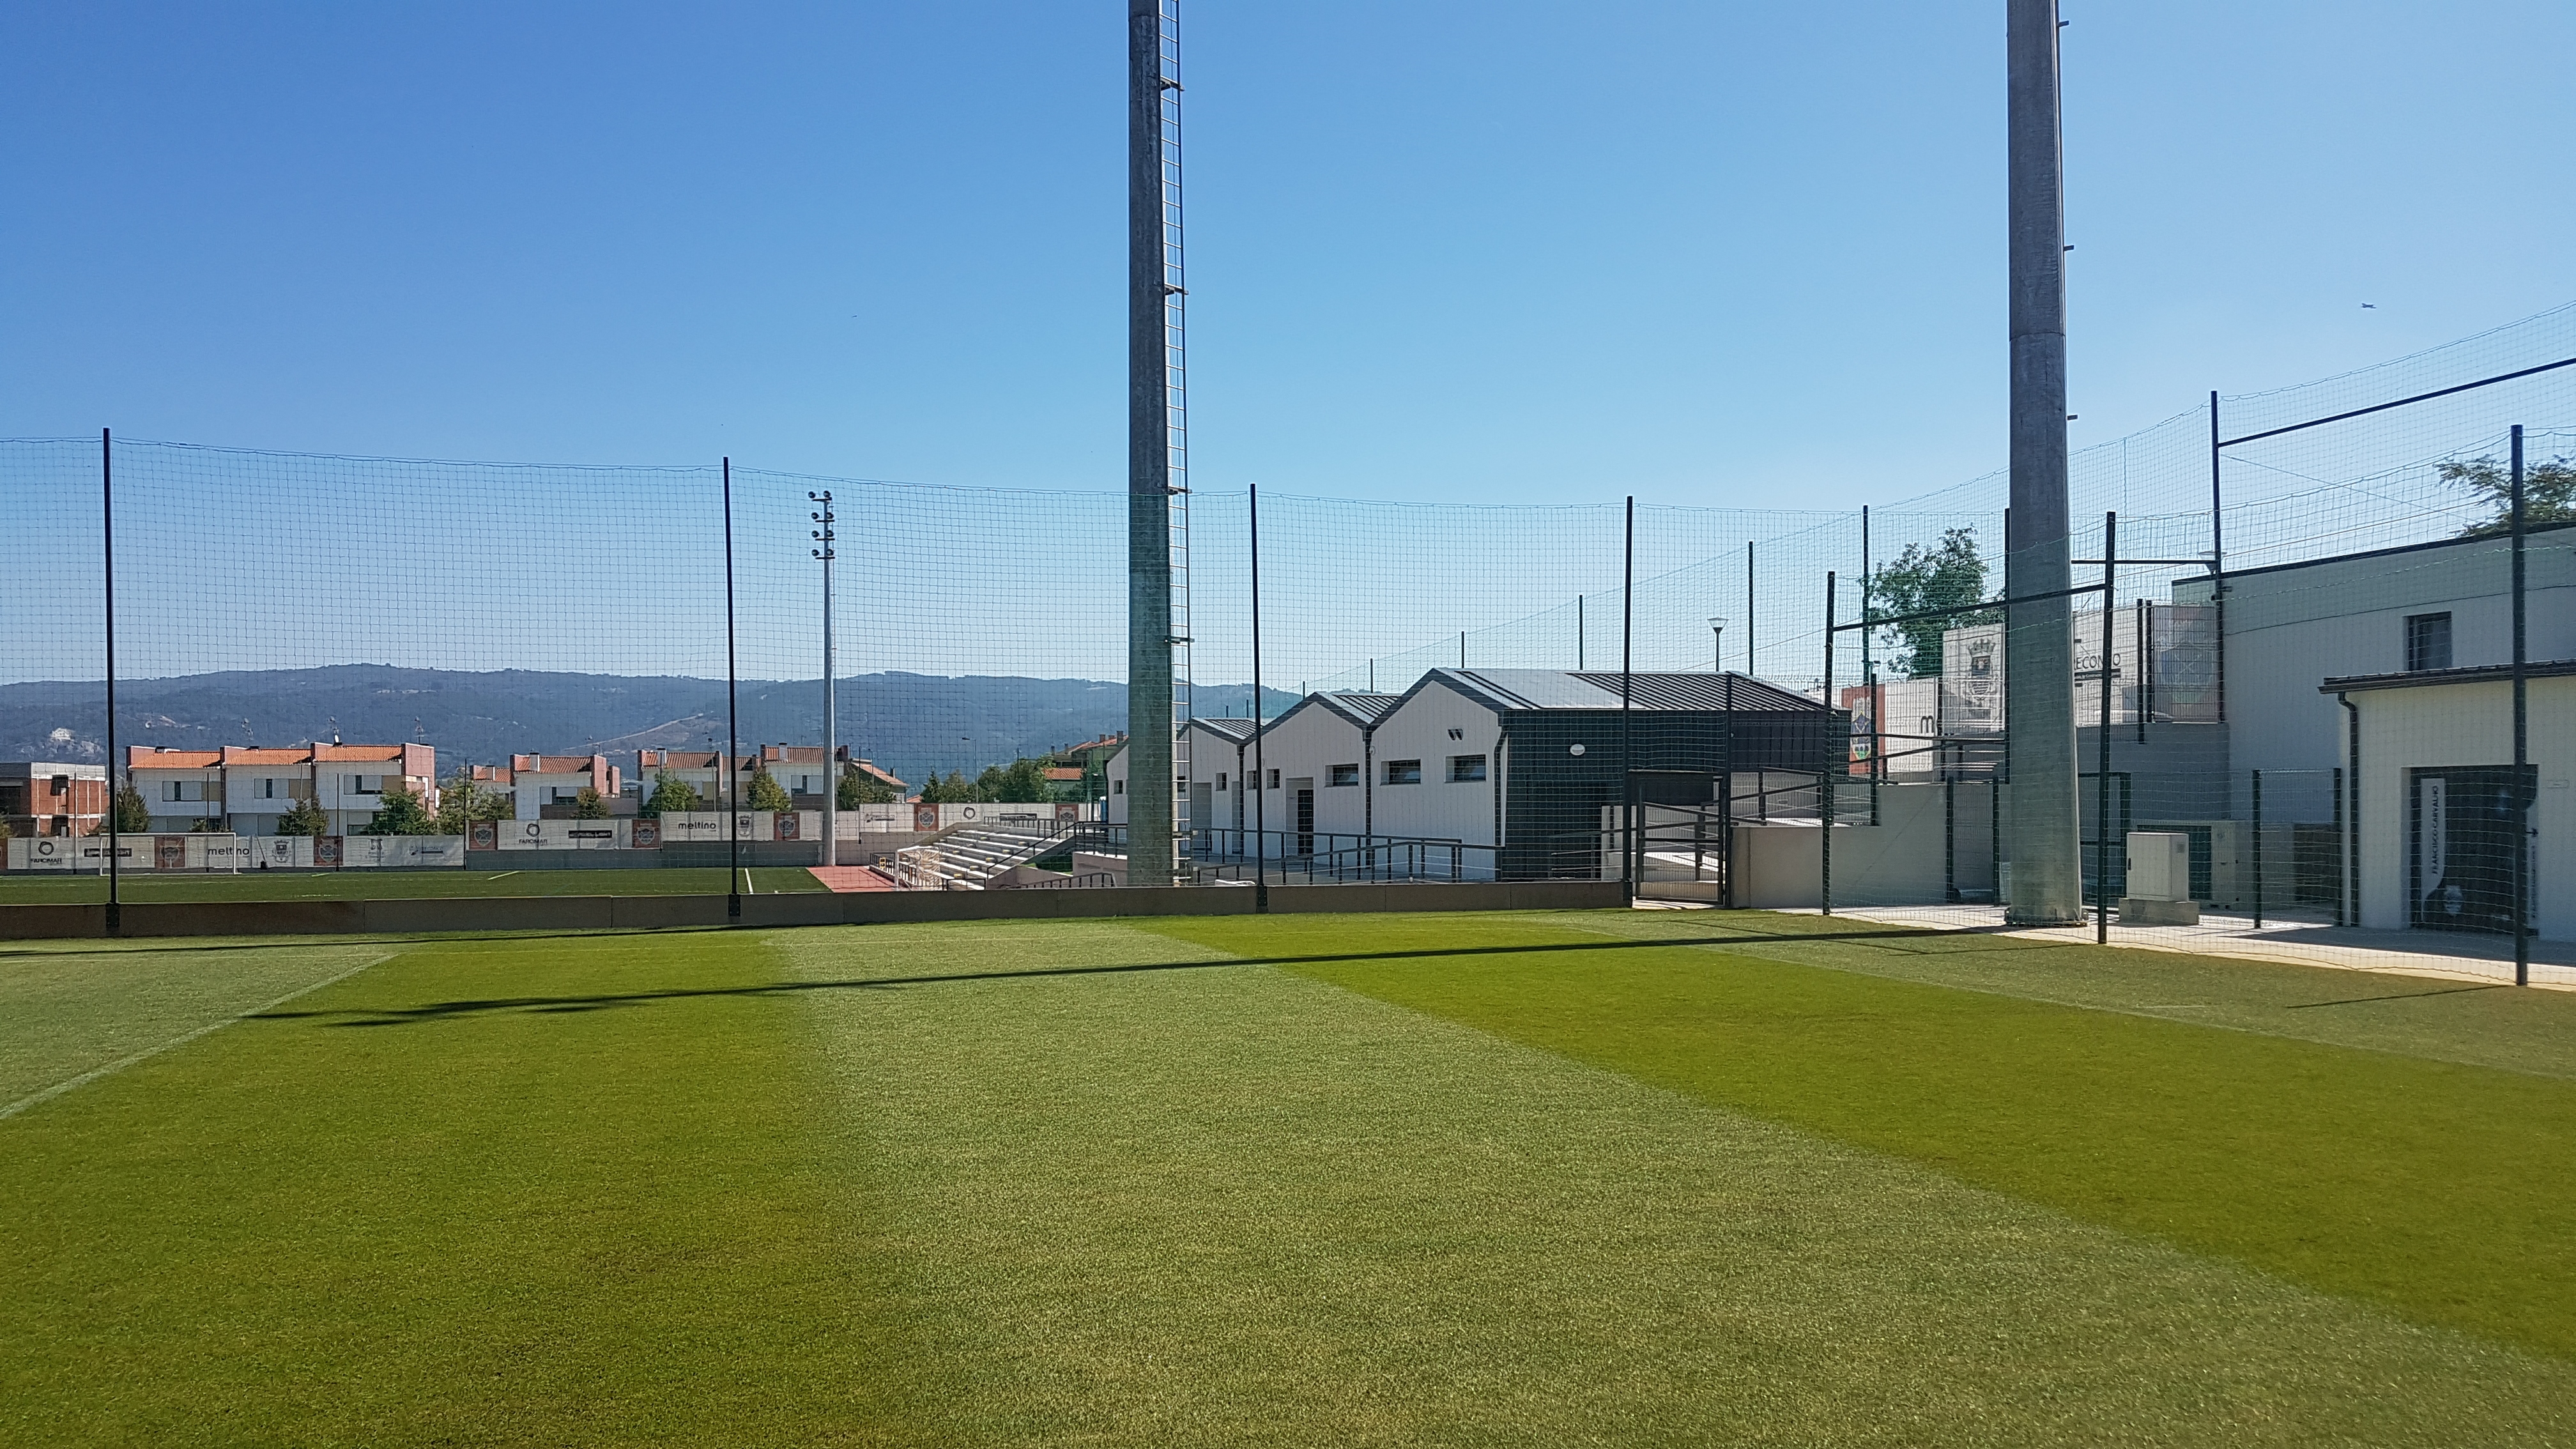 CONSTRUCTION OF THE FRANCISCO CARVALHO SPORTS COMPLEX IN CHAVES